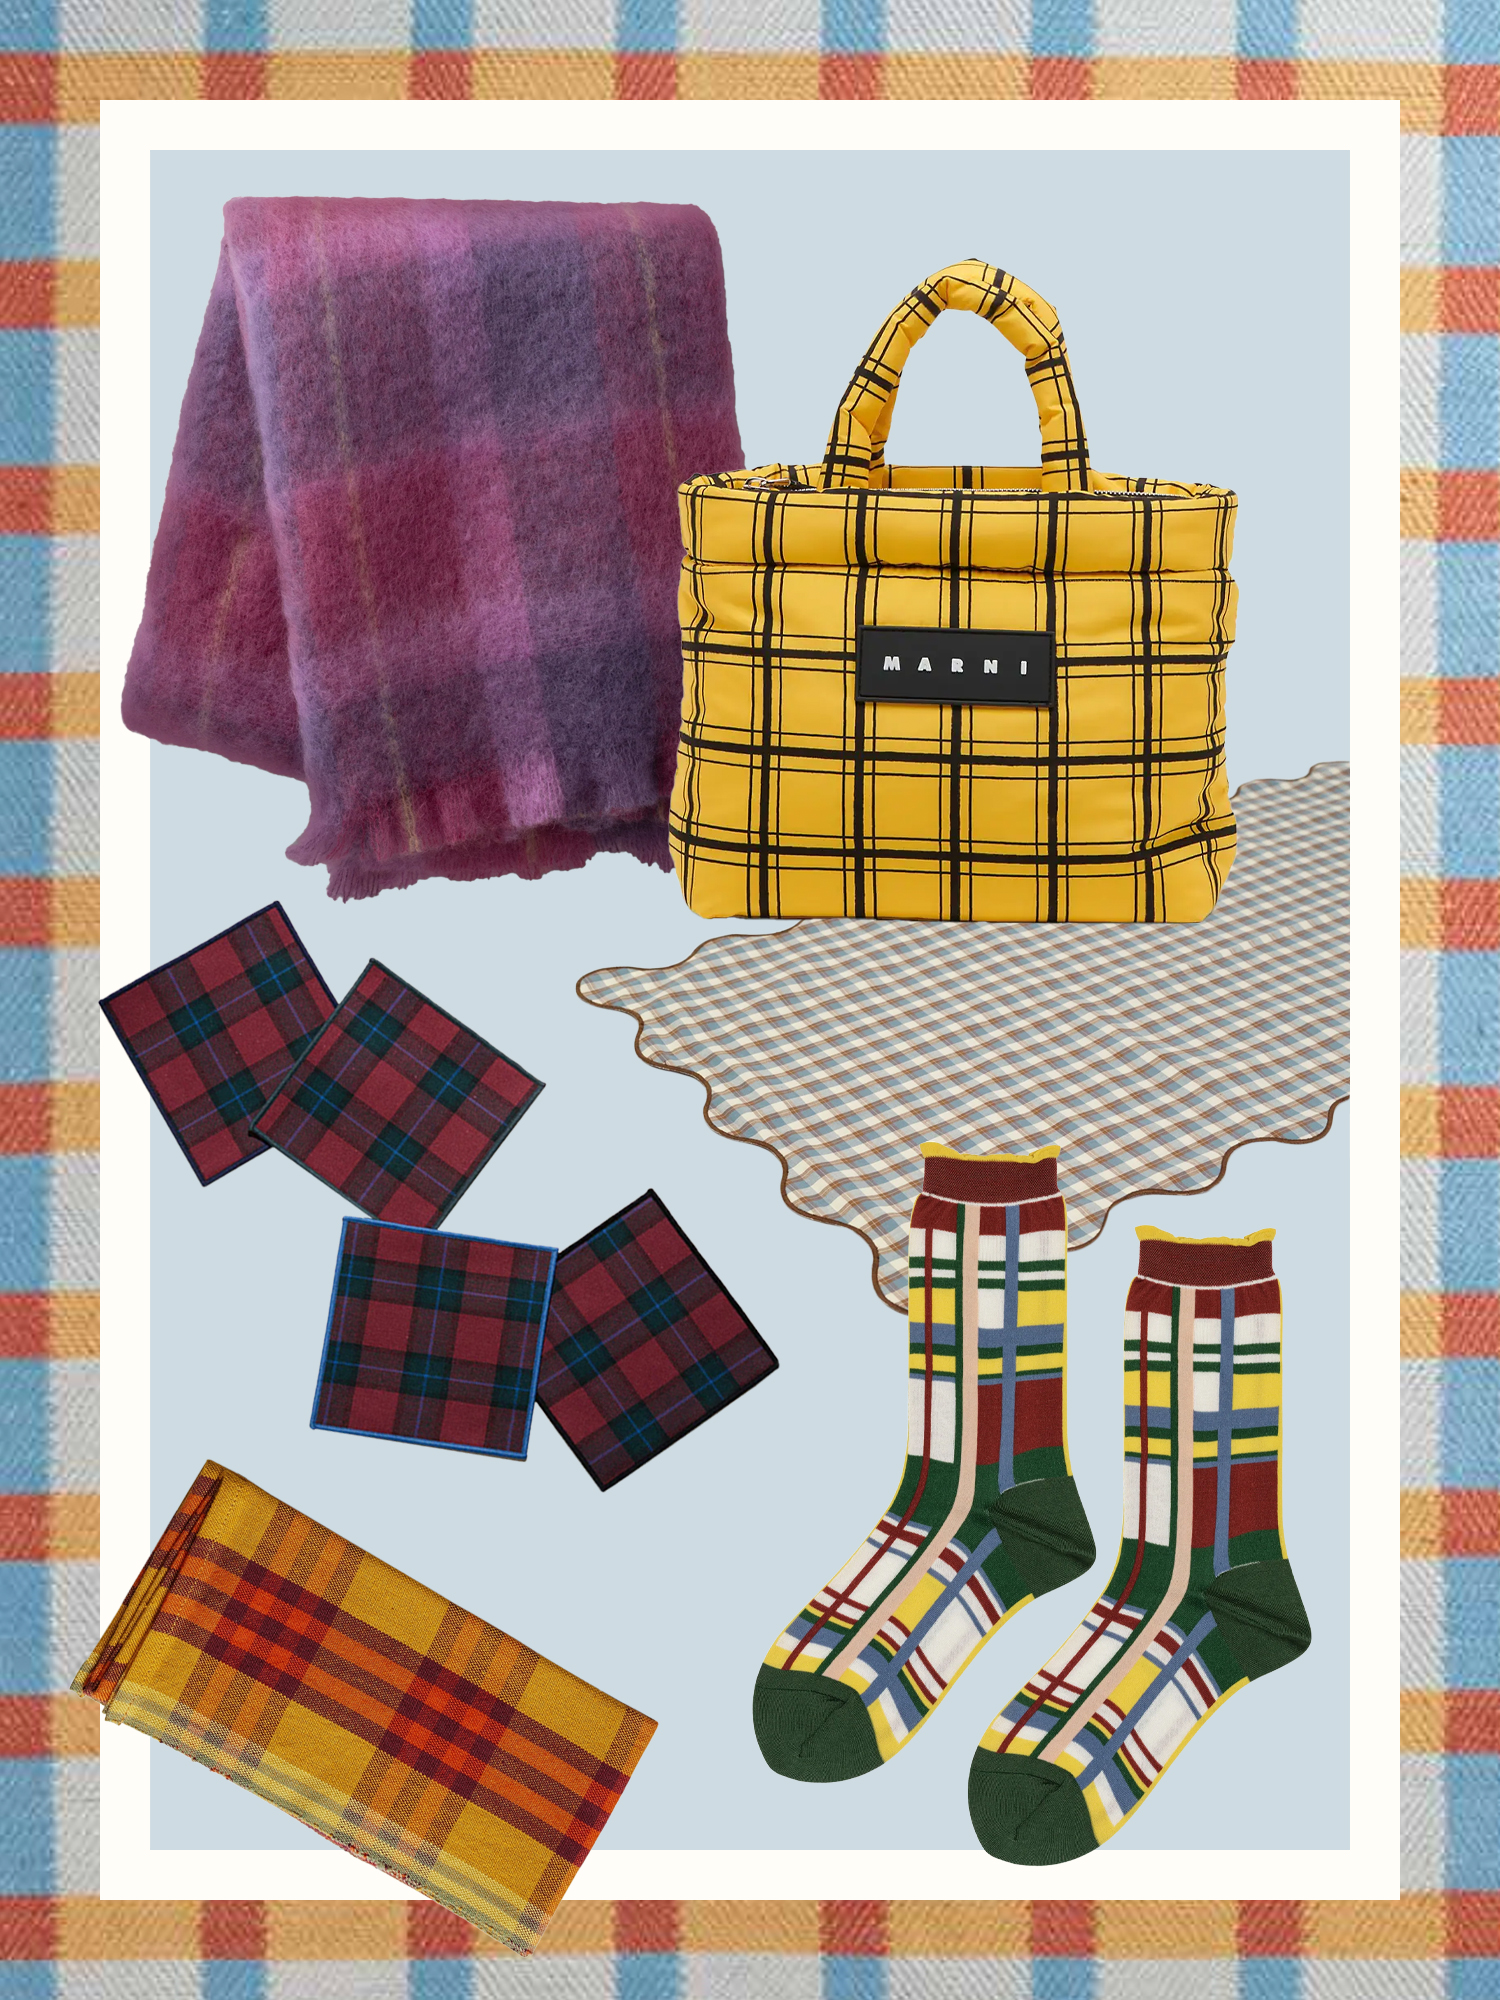 The Best Plaid Home Products, From Blankets to Table Linens